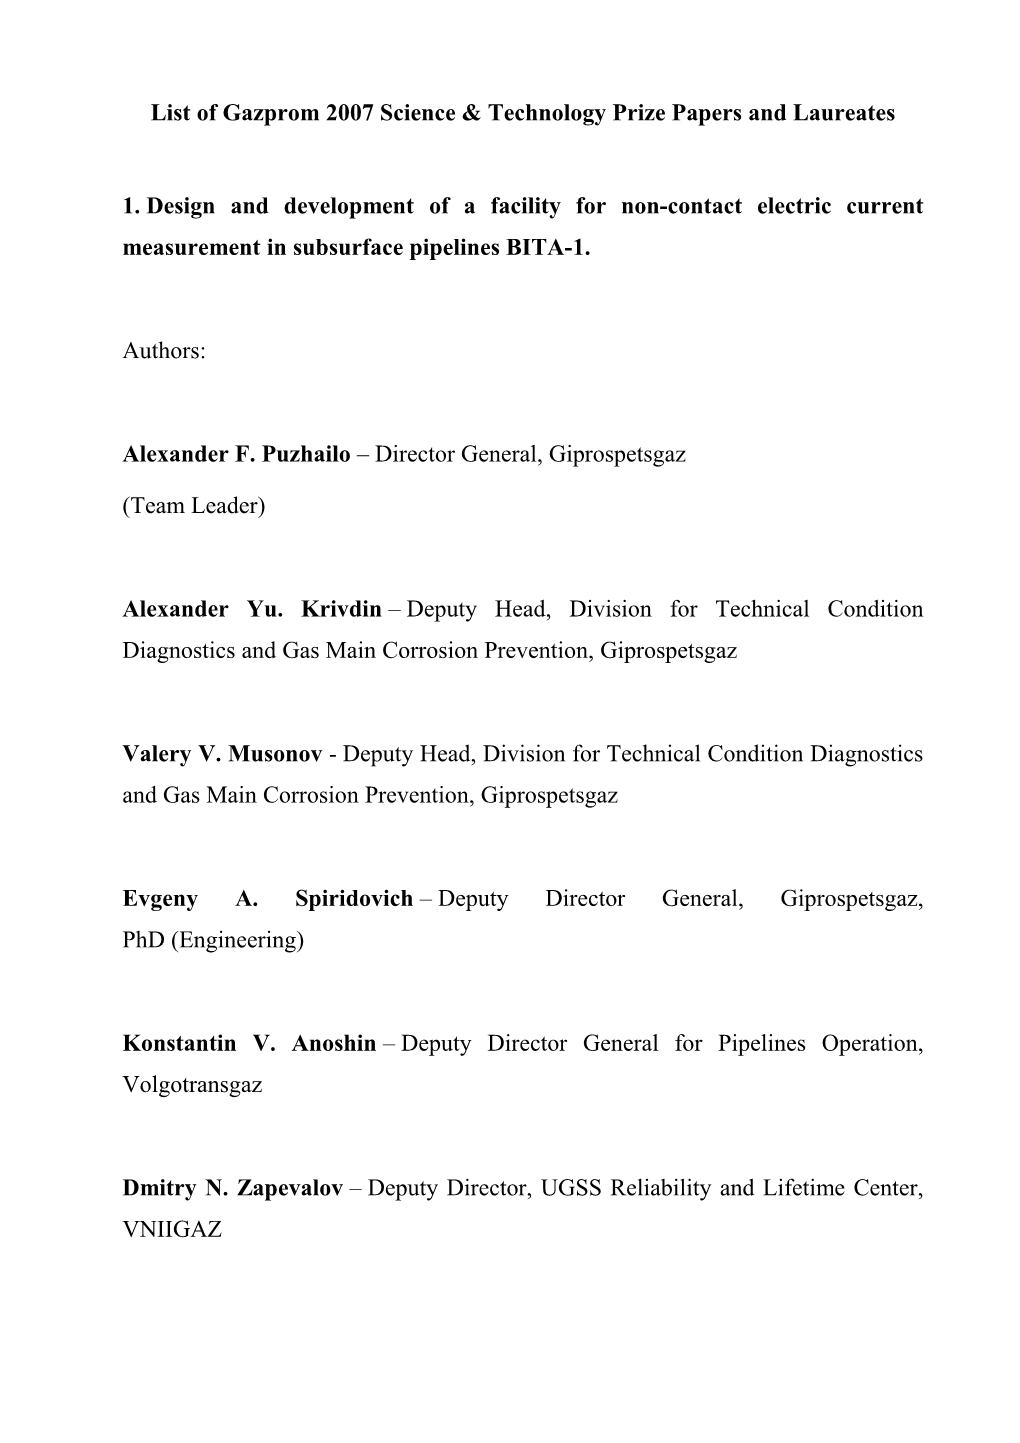 List of Gazprom 2007 Science & Technology Prizepapers and Laureates